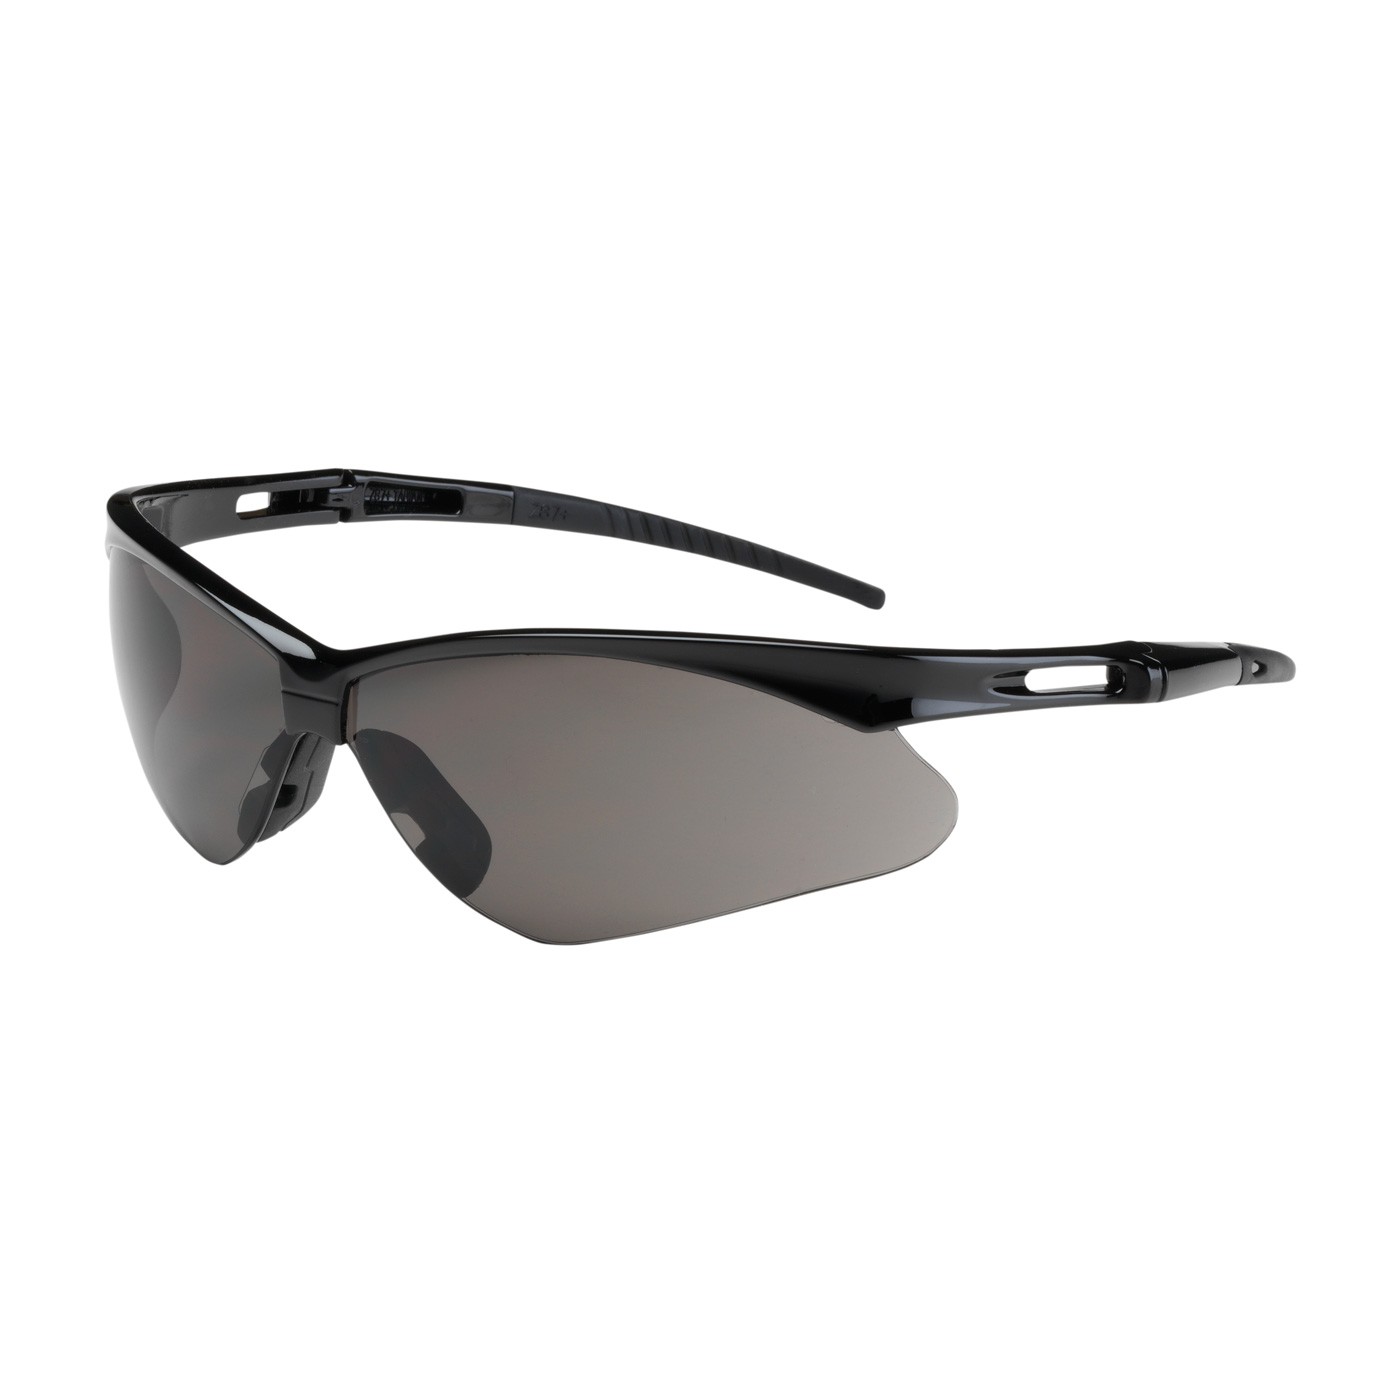 Anser™ Semi-Rimless Safety Glasses with Black Frame, Gray Lens and Anti-Scratch Coating  (#250-AN-10112)